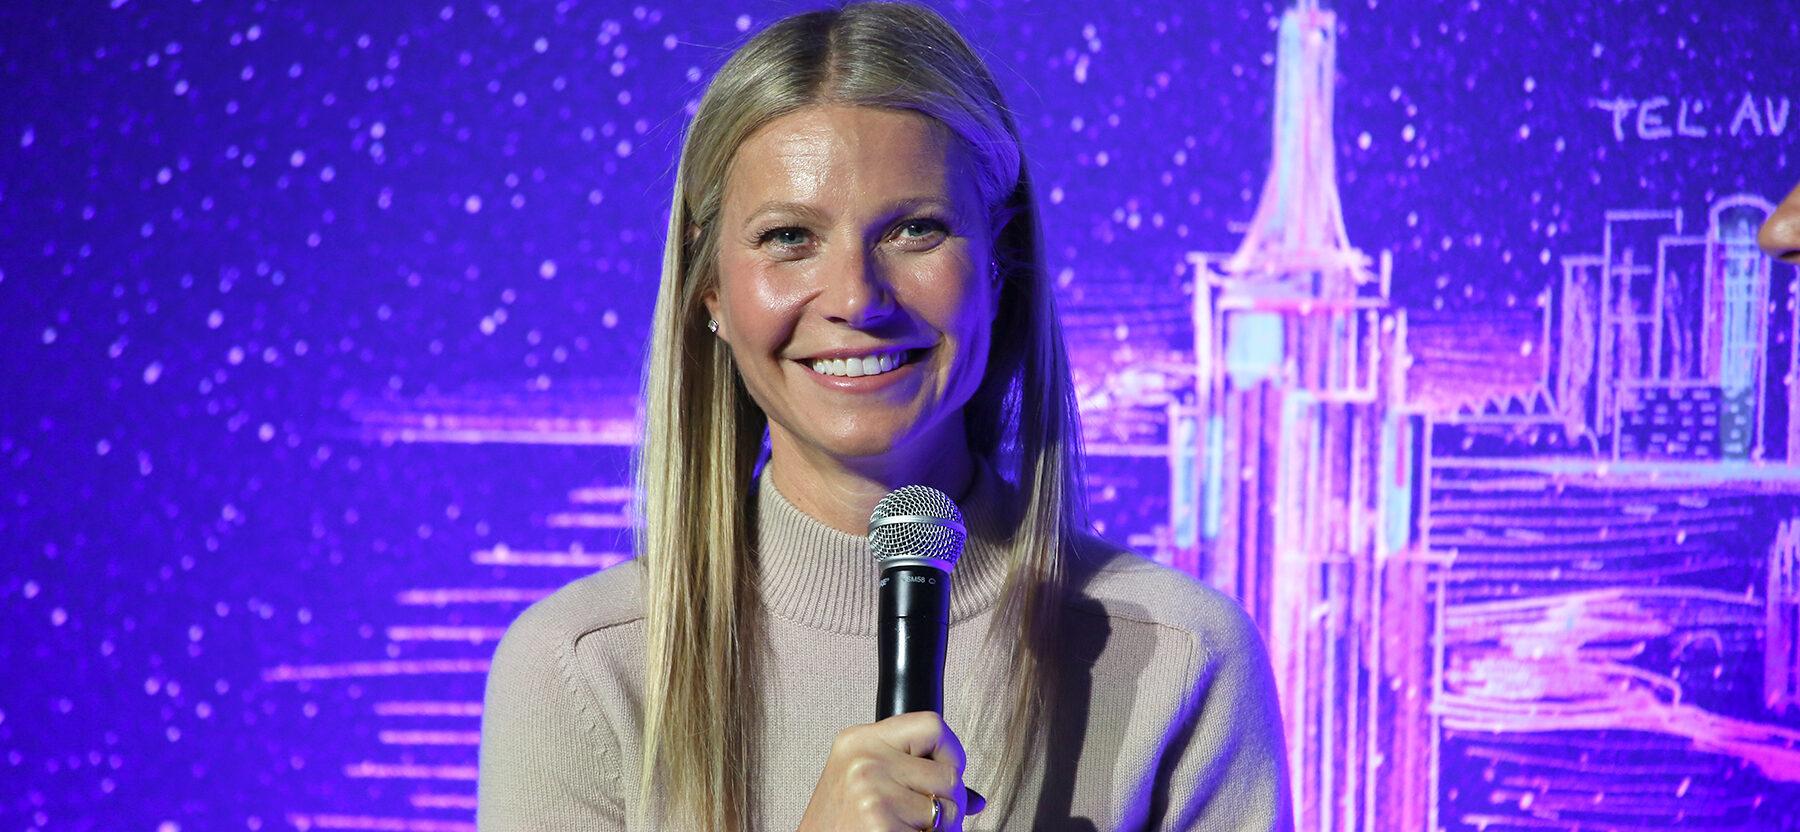 Gwyneth Paltrow Takes BITE Of Vagina Candle In New Super Bowl Commercial!